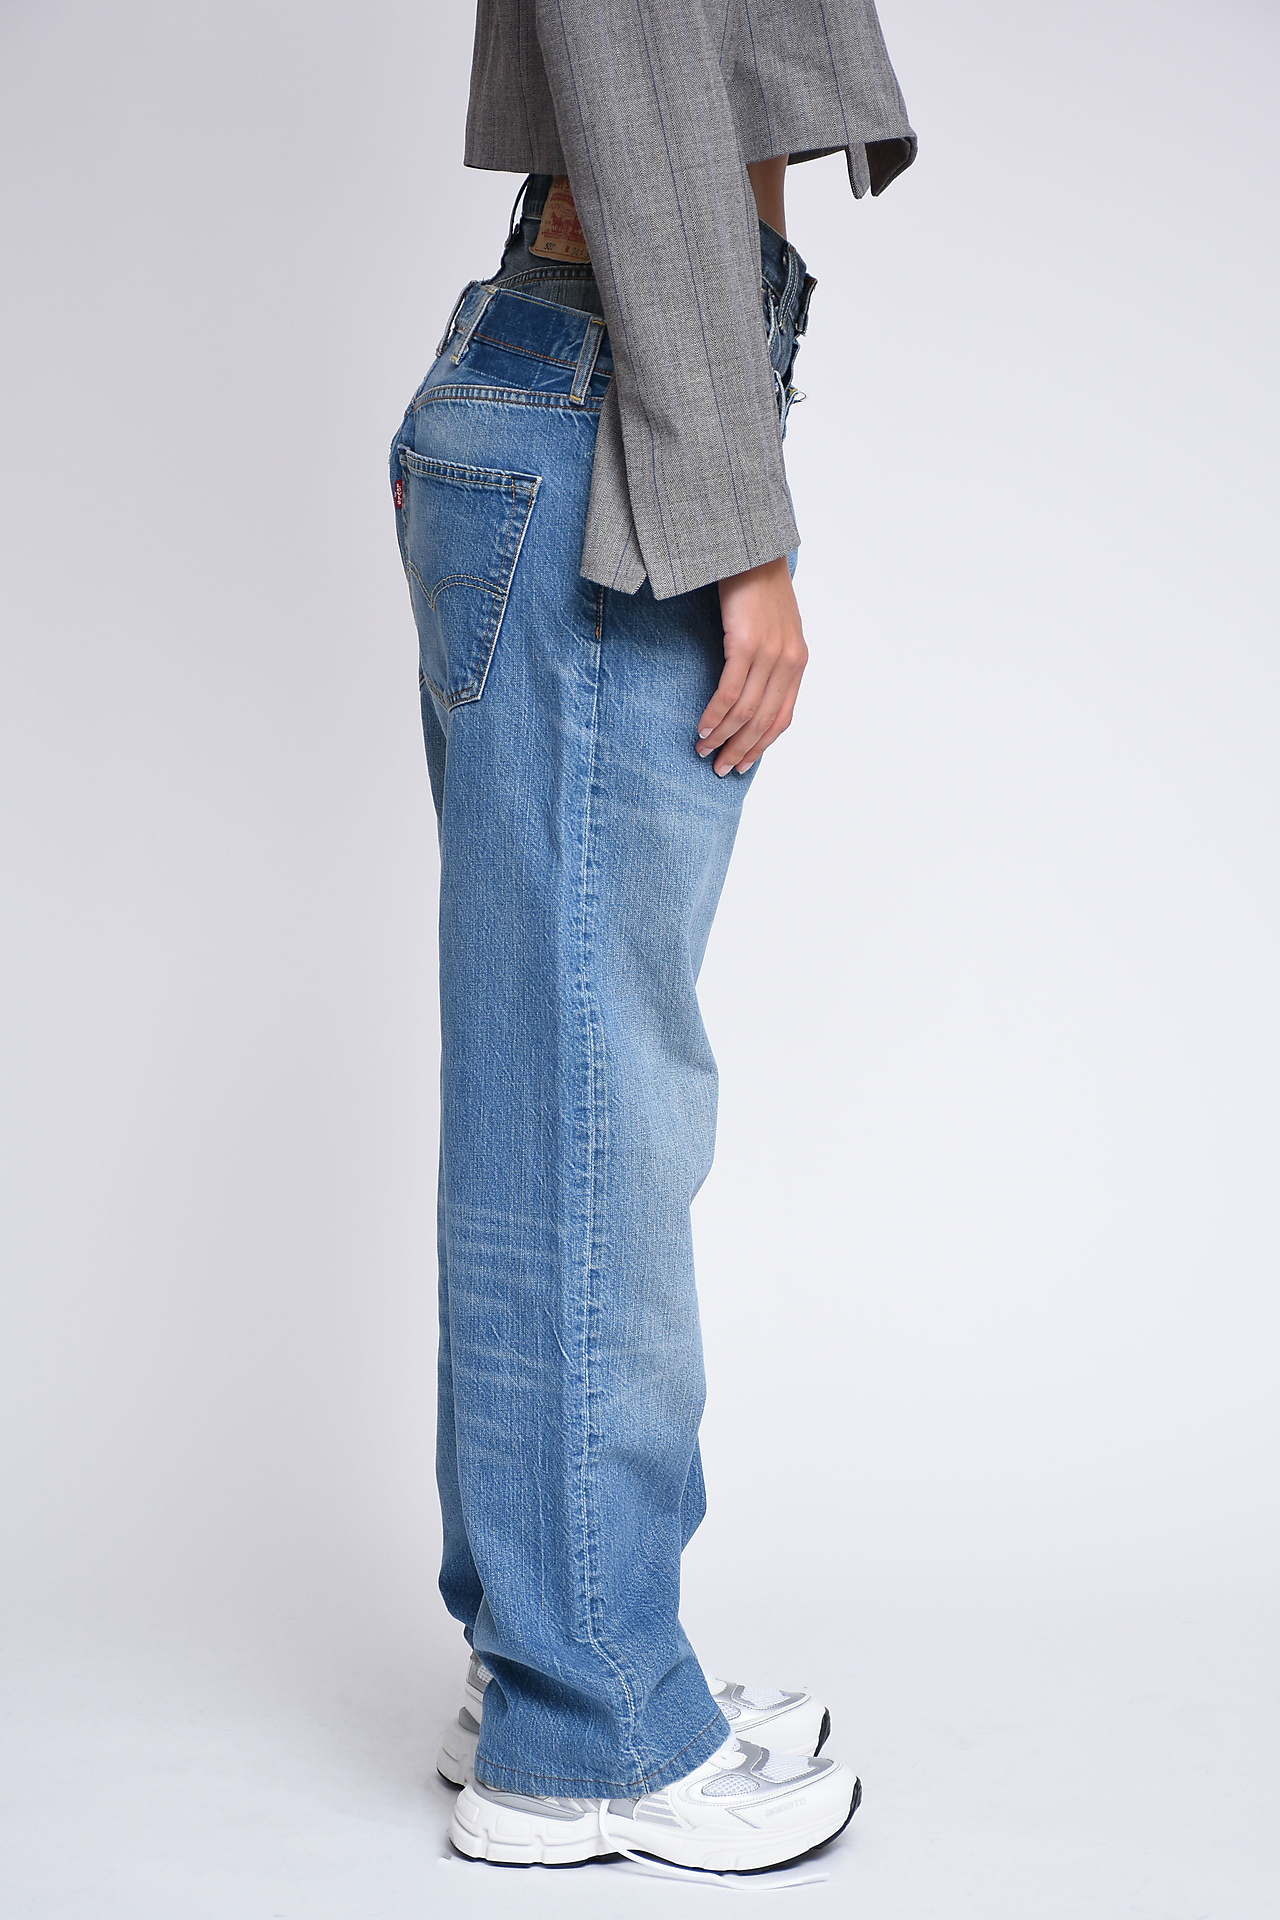 1/OFF Jeans Blue